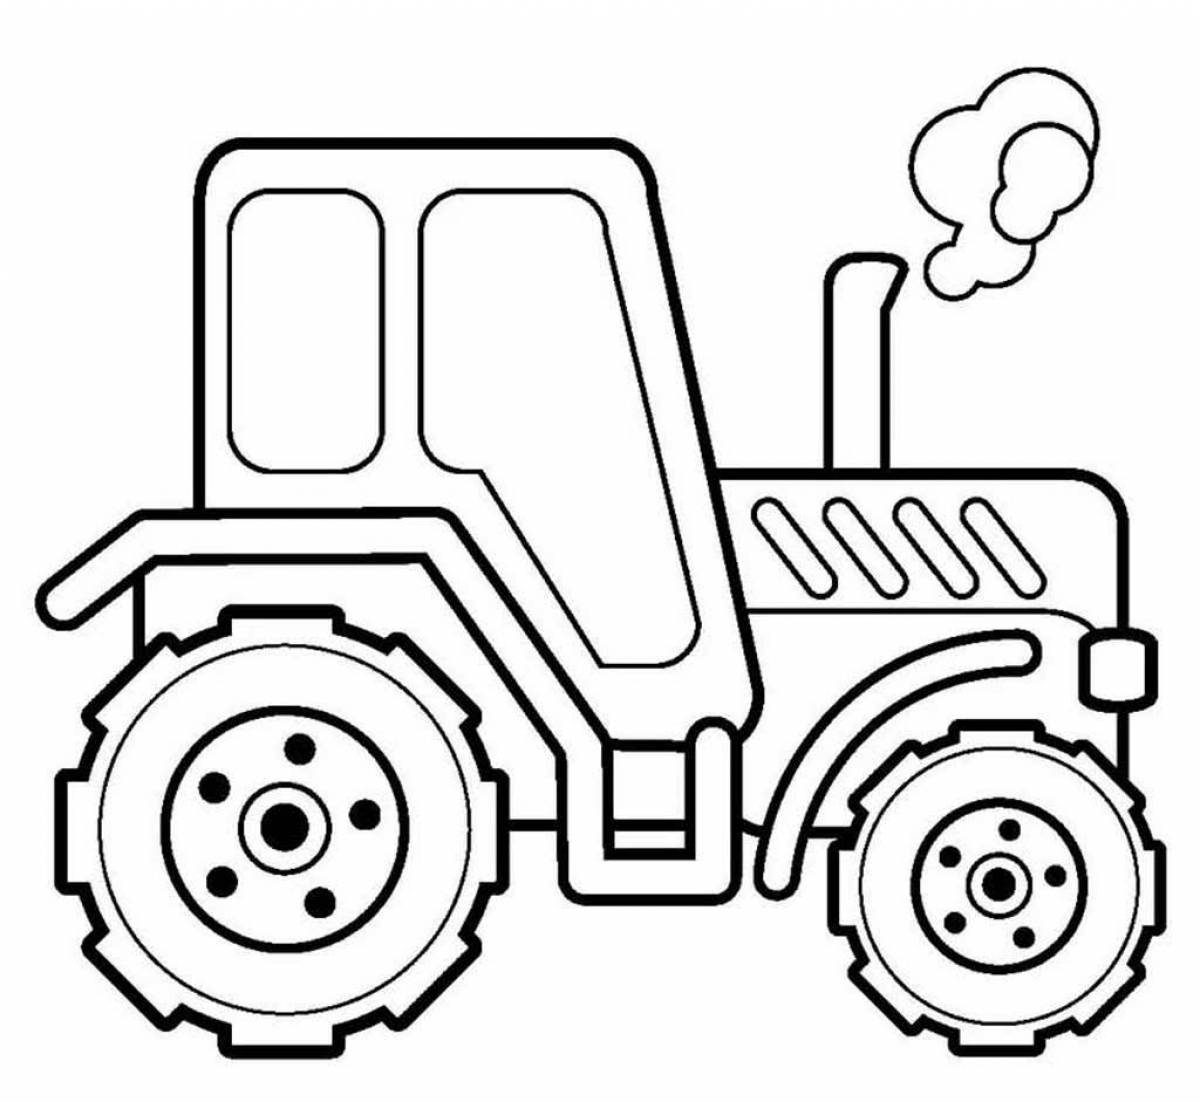 Awesome tractor coloring page for kids